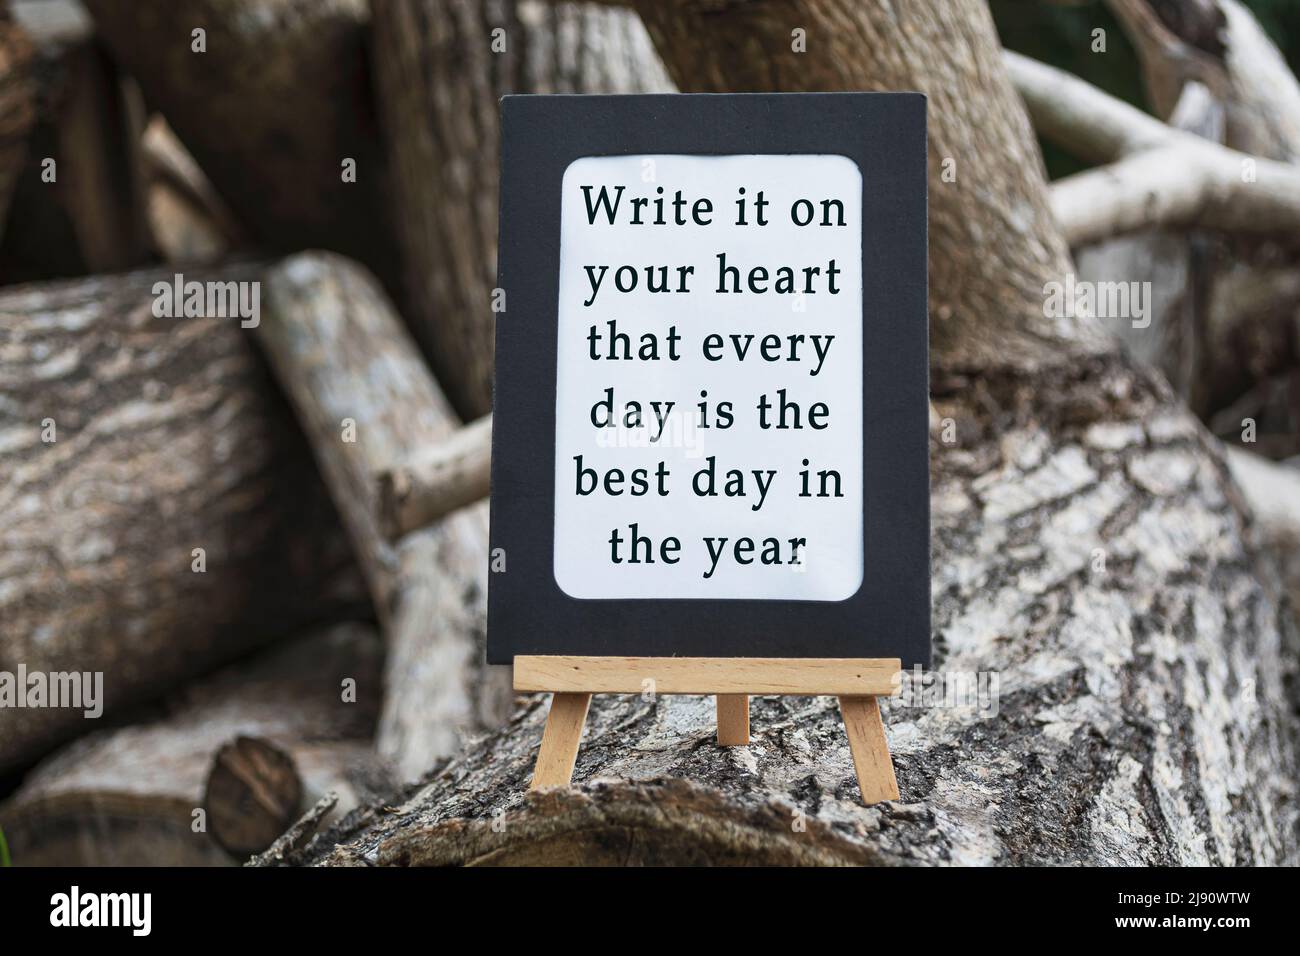 Motivational quote on a chalkboard isolated on tree trunk - Write it on your heart that every day is the best day in the year. Stock Photo